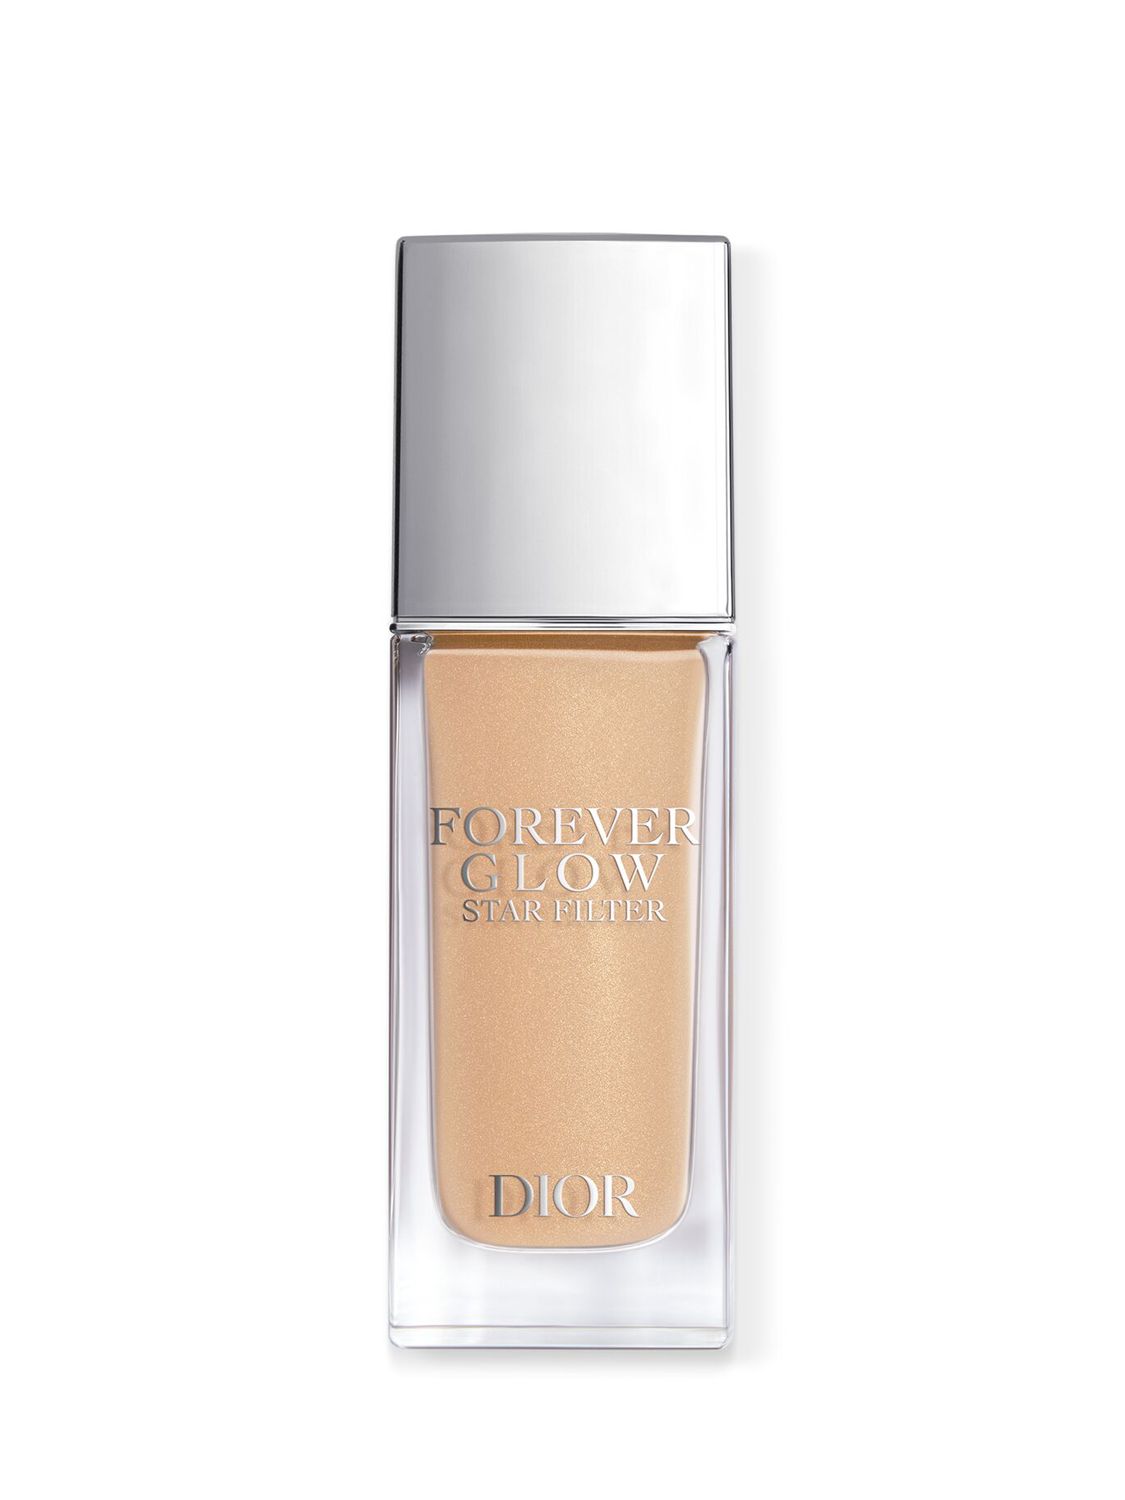 DIOR Forever Natural Nude Foundation, 2.5N at John Lewis & Partners